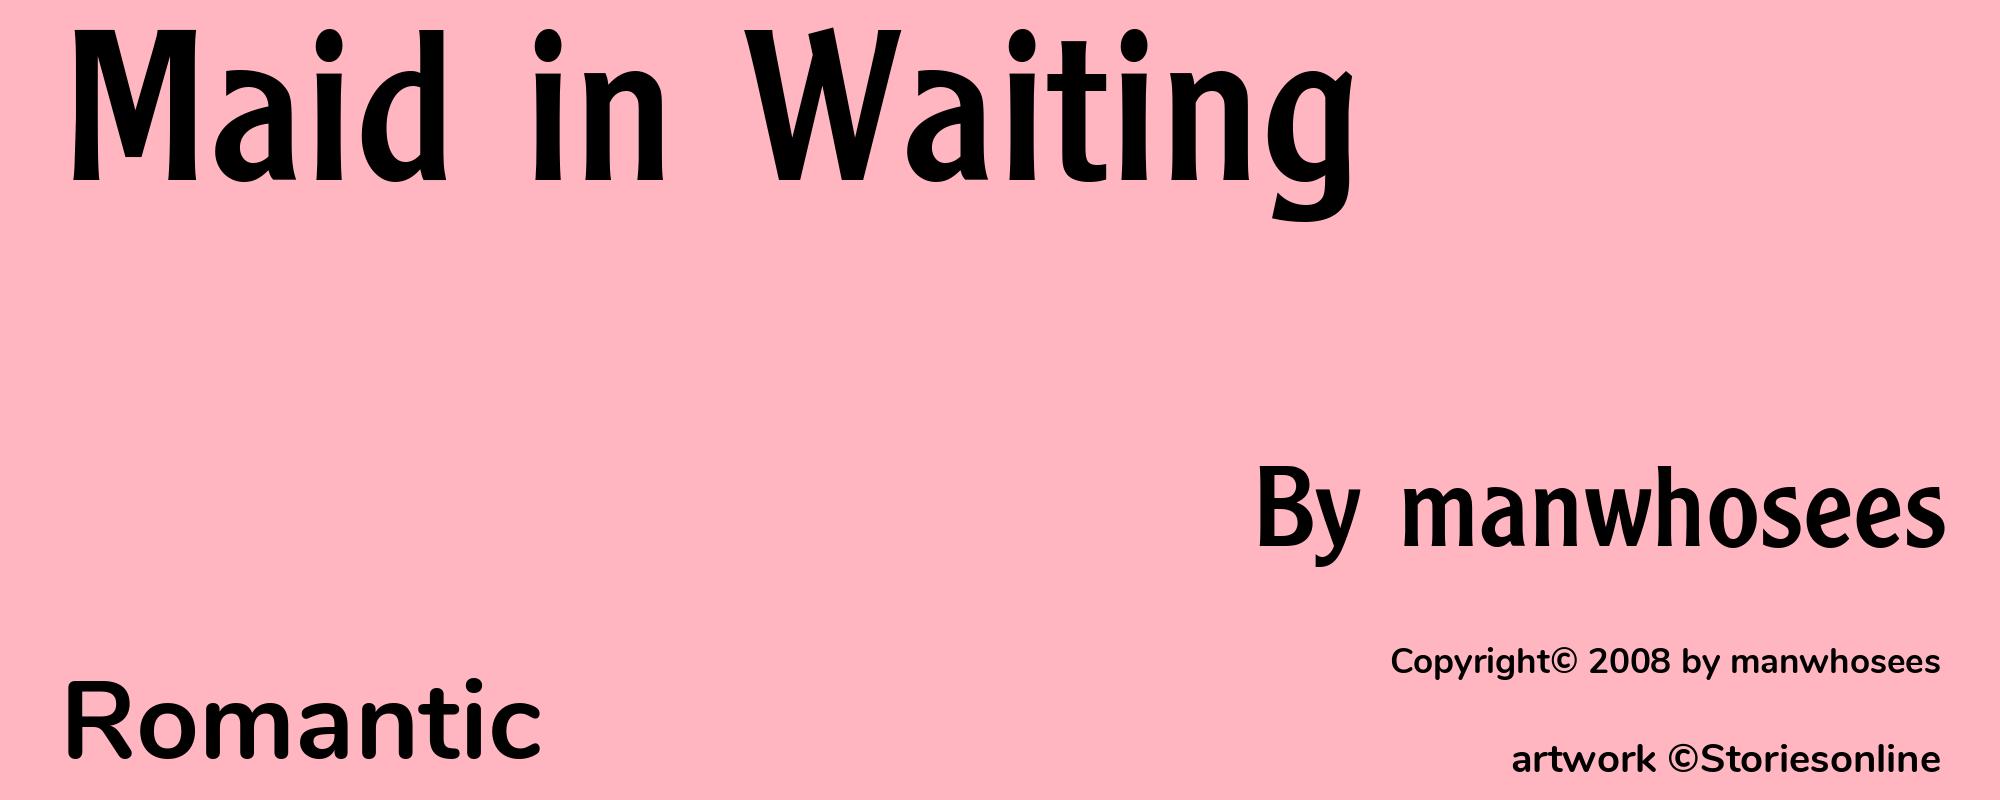 Maid in Waiting - Cover